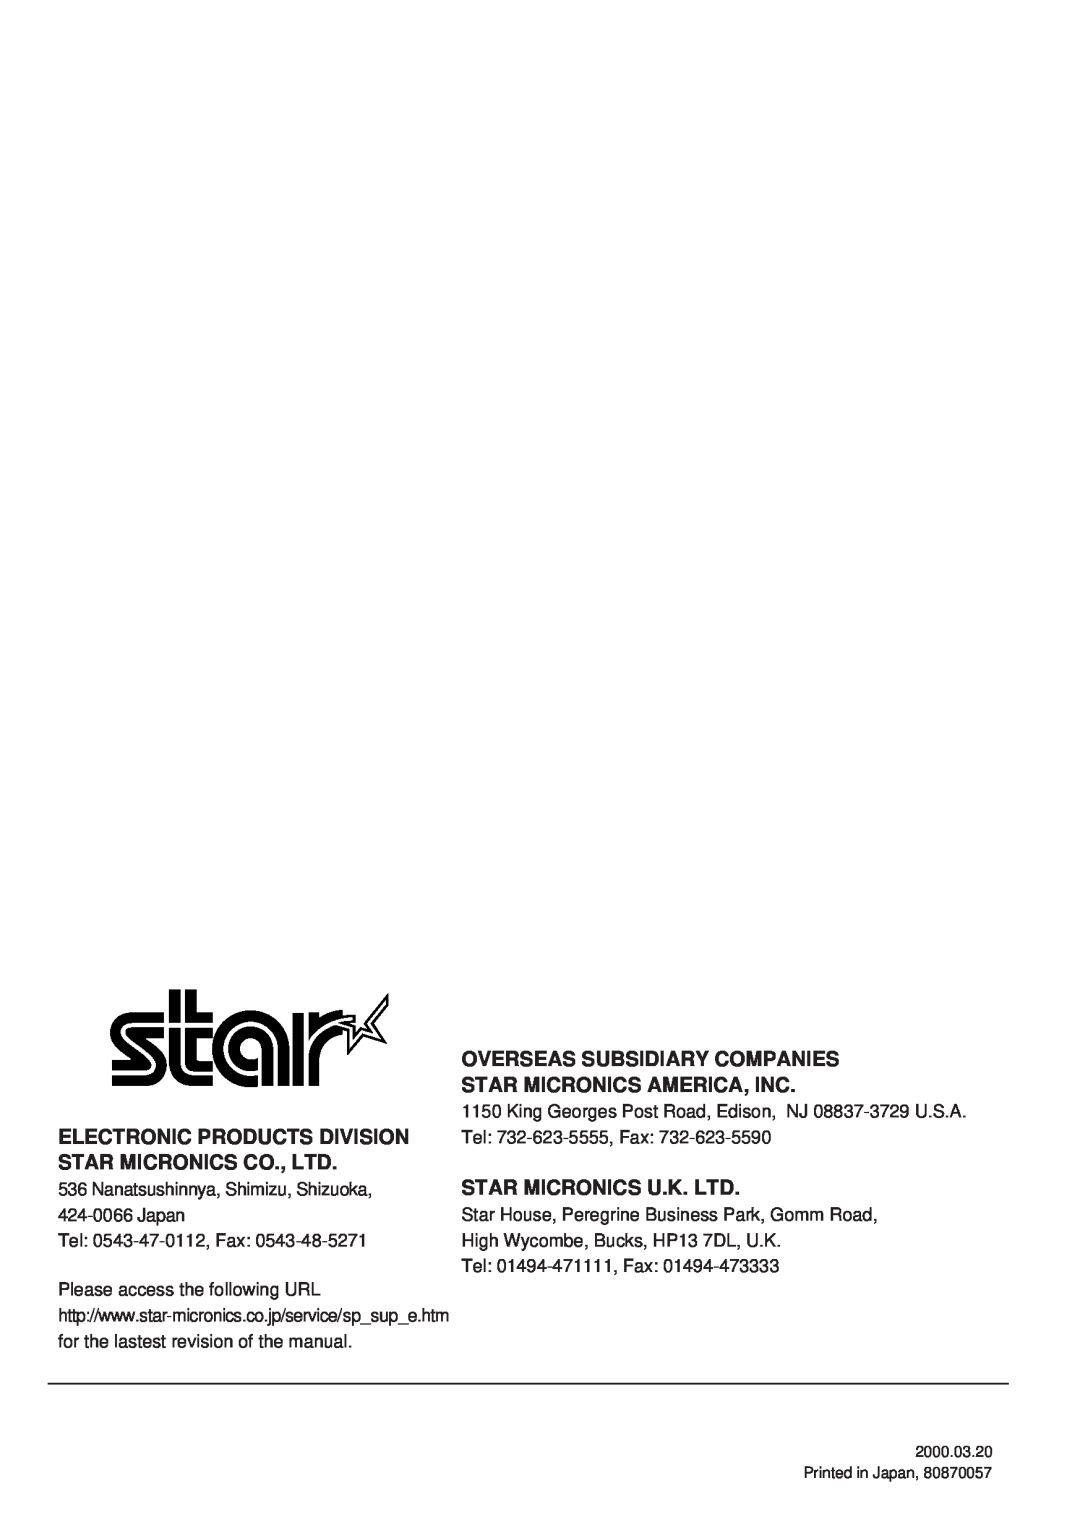 Star Micronics SP200F Overseas Subsidiary Companies, Star Micronics America, Inc, Electronic Products Division, Japan 